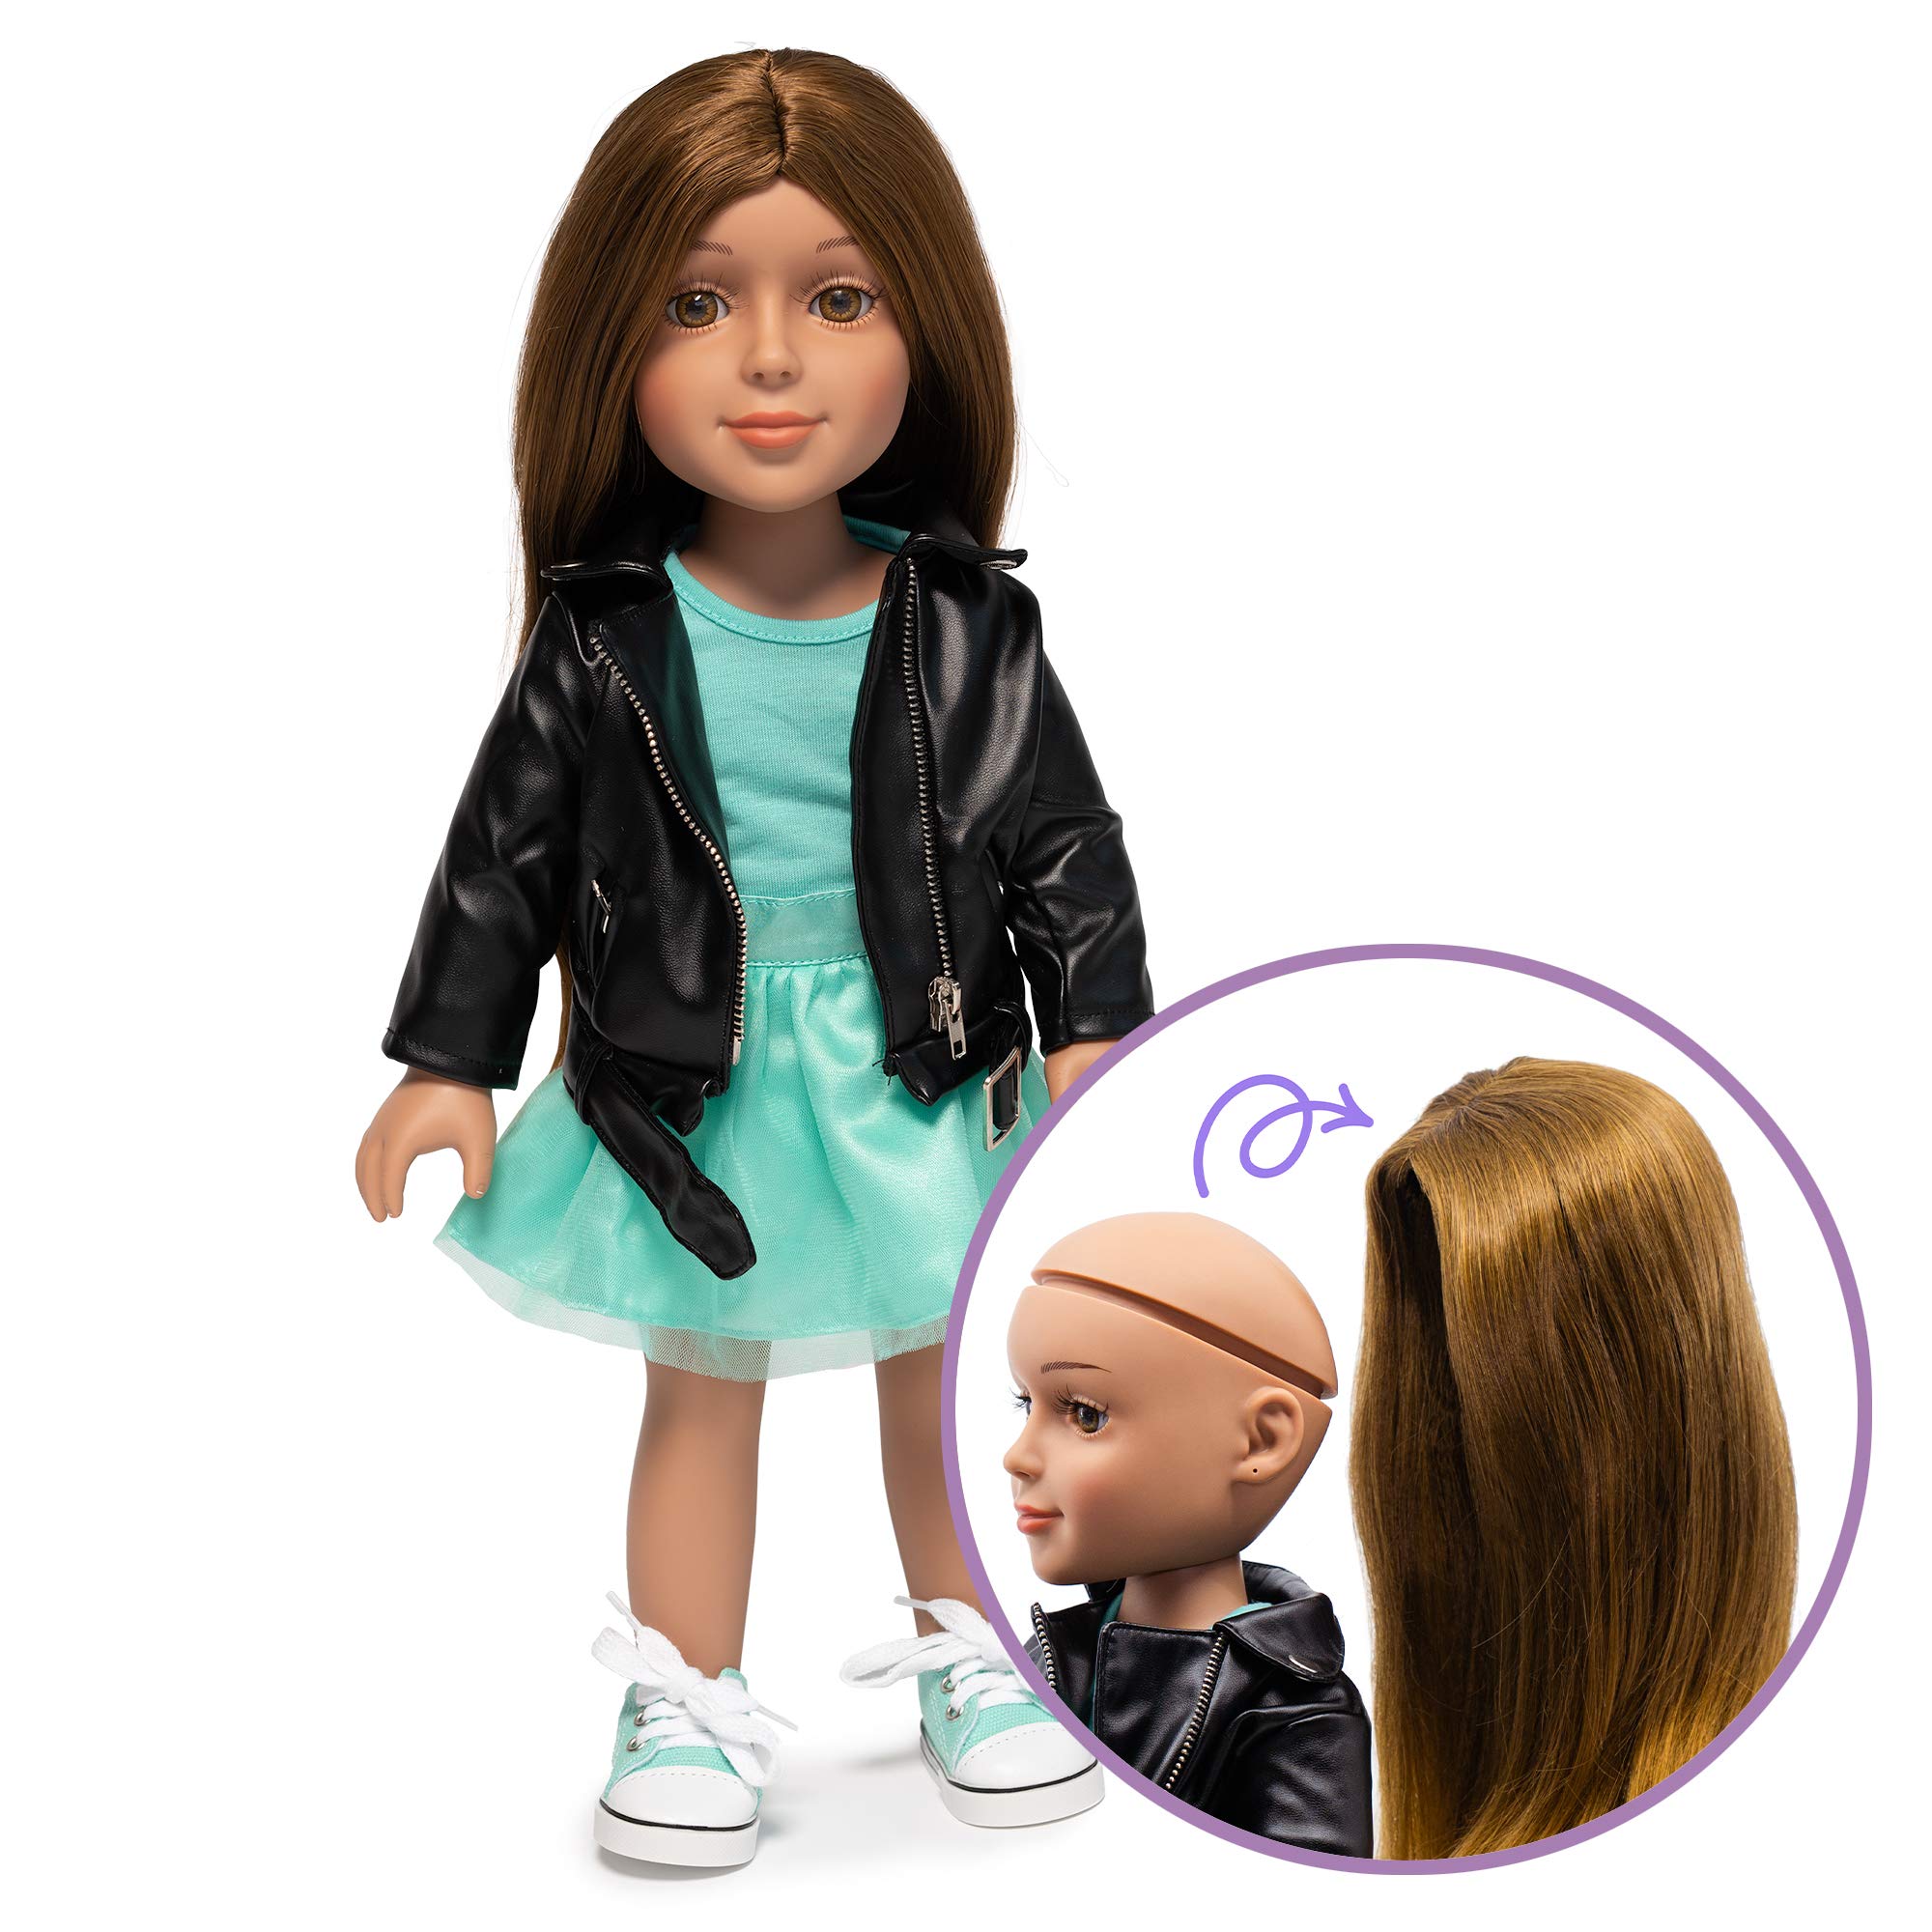 I'm A Girly Fashion Doll Lucy w/Brown Interchangeable Removable Synthetic Wig to Style - Fashionista Model Figure for Kids 8+ Years - 18